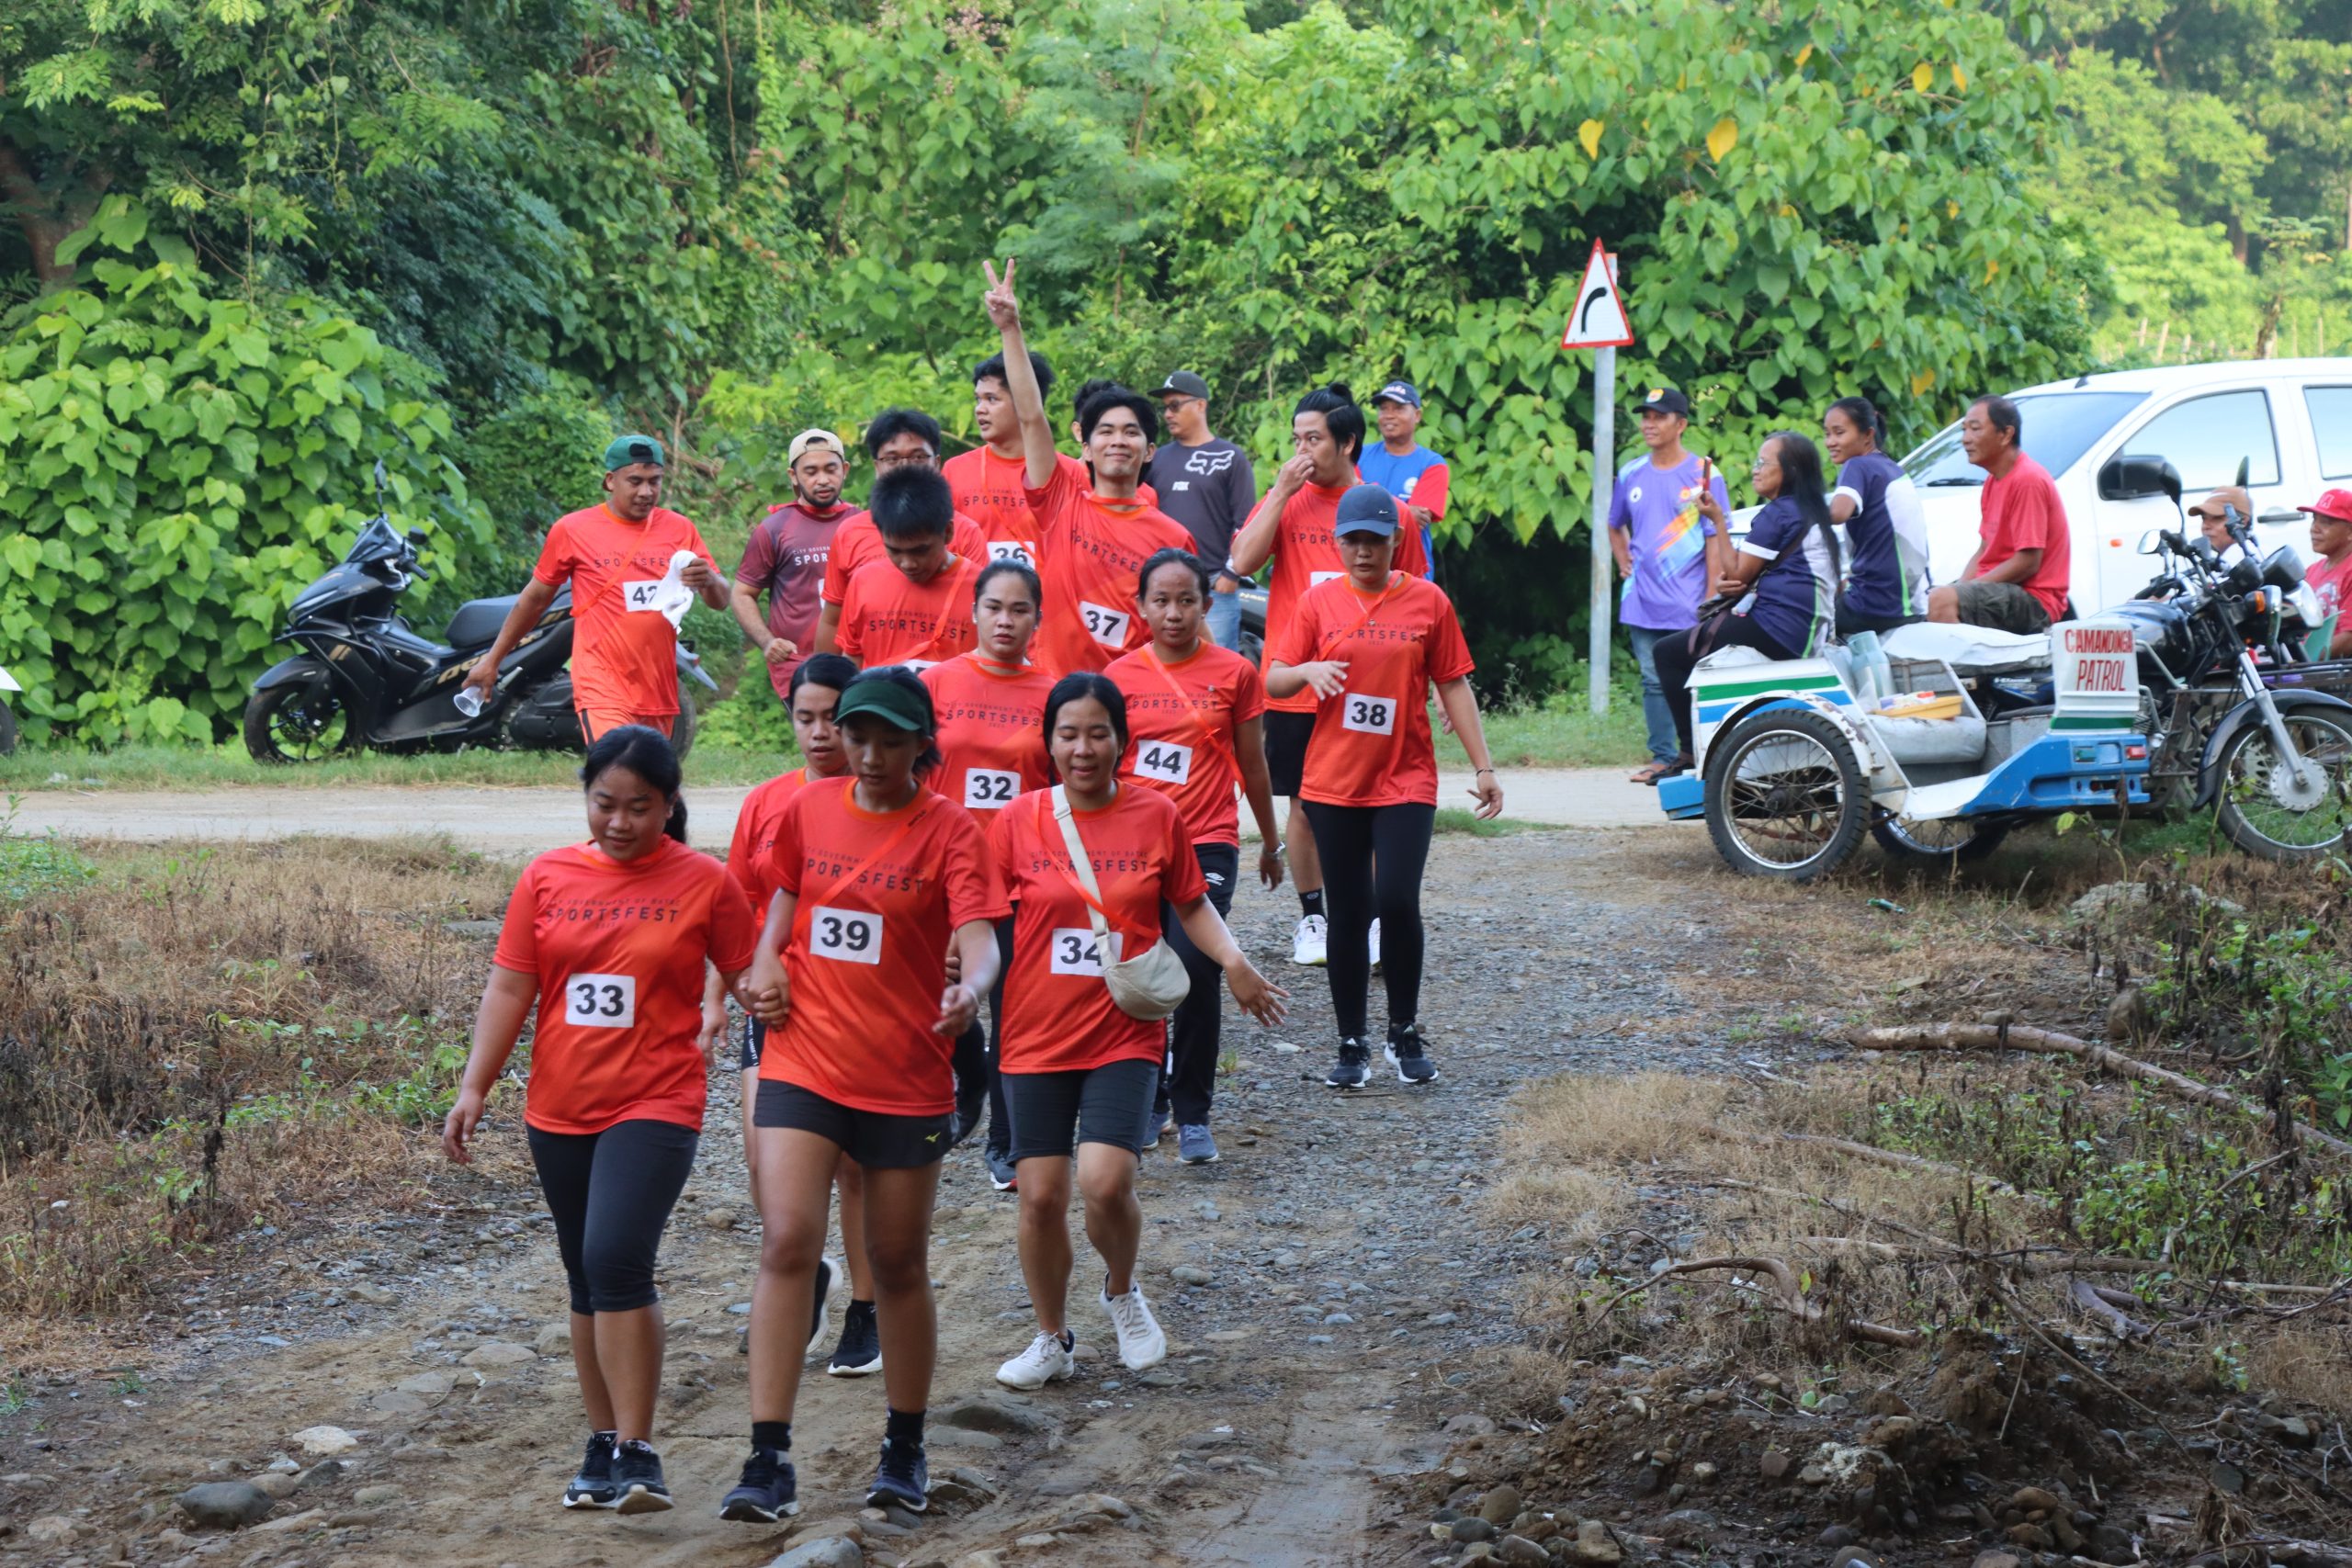 CITY OF BATAC CELEBRATES ENVIRONMENT WITH SUCCESSFUL CGB RUN-PLANT EVENT